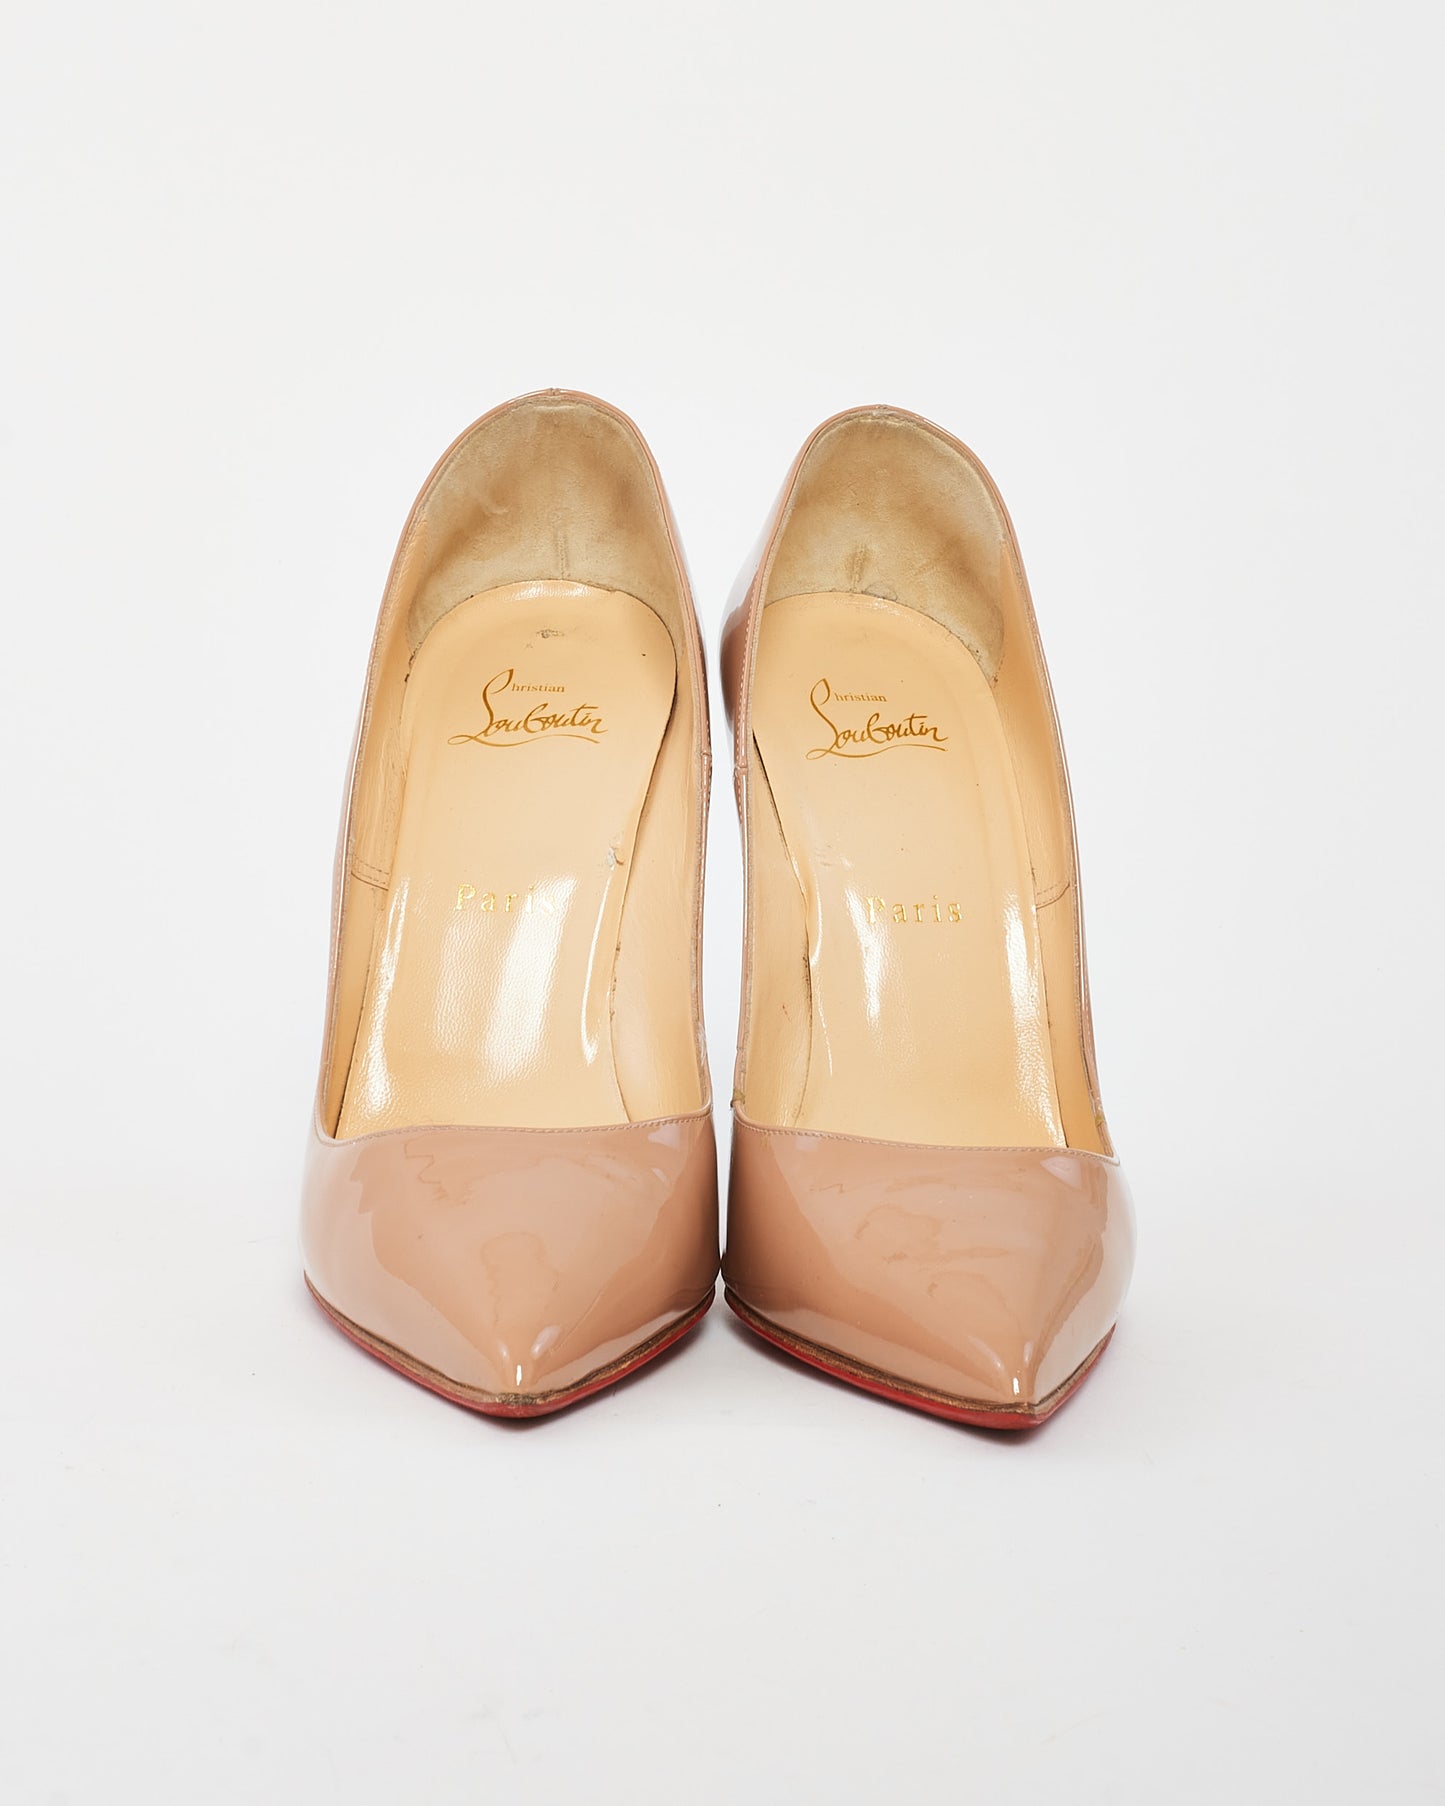 Christian Louboutin Nude Patent Leather So Kate Pumps 120 - 39